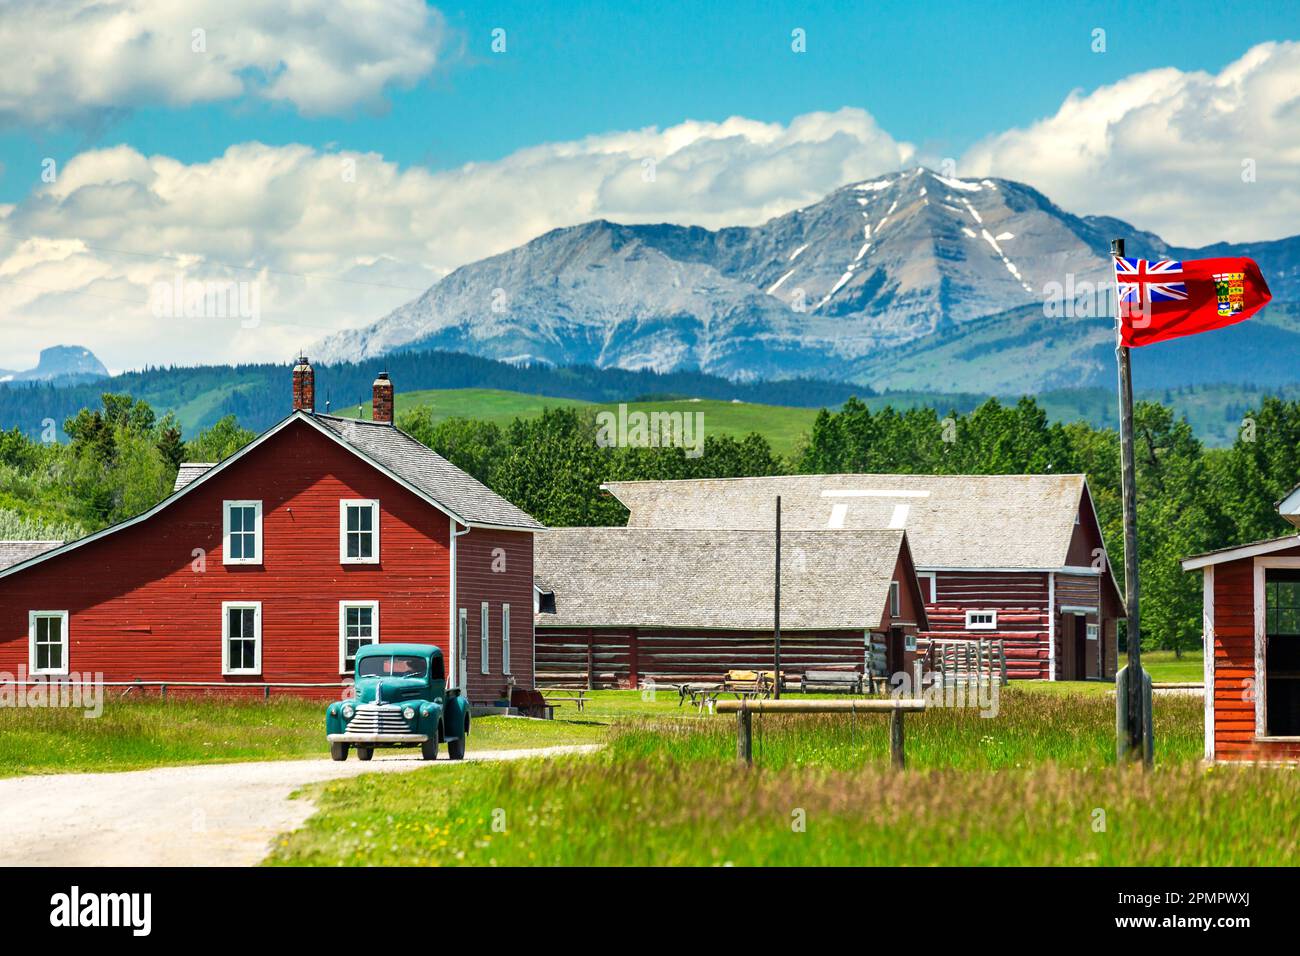 Historical site with red painted buildings, old truck, foothills, mountains, blue sky and clouds in the background, South of Longview, Alberta Stock Photo